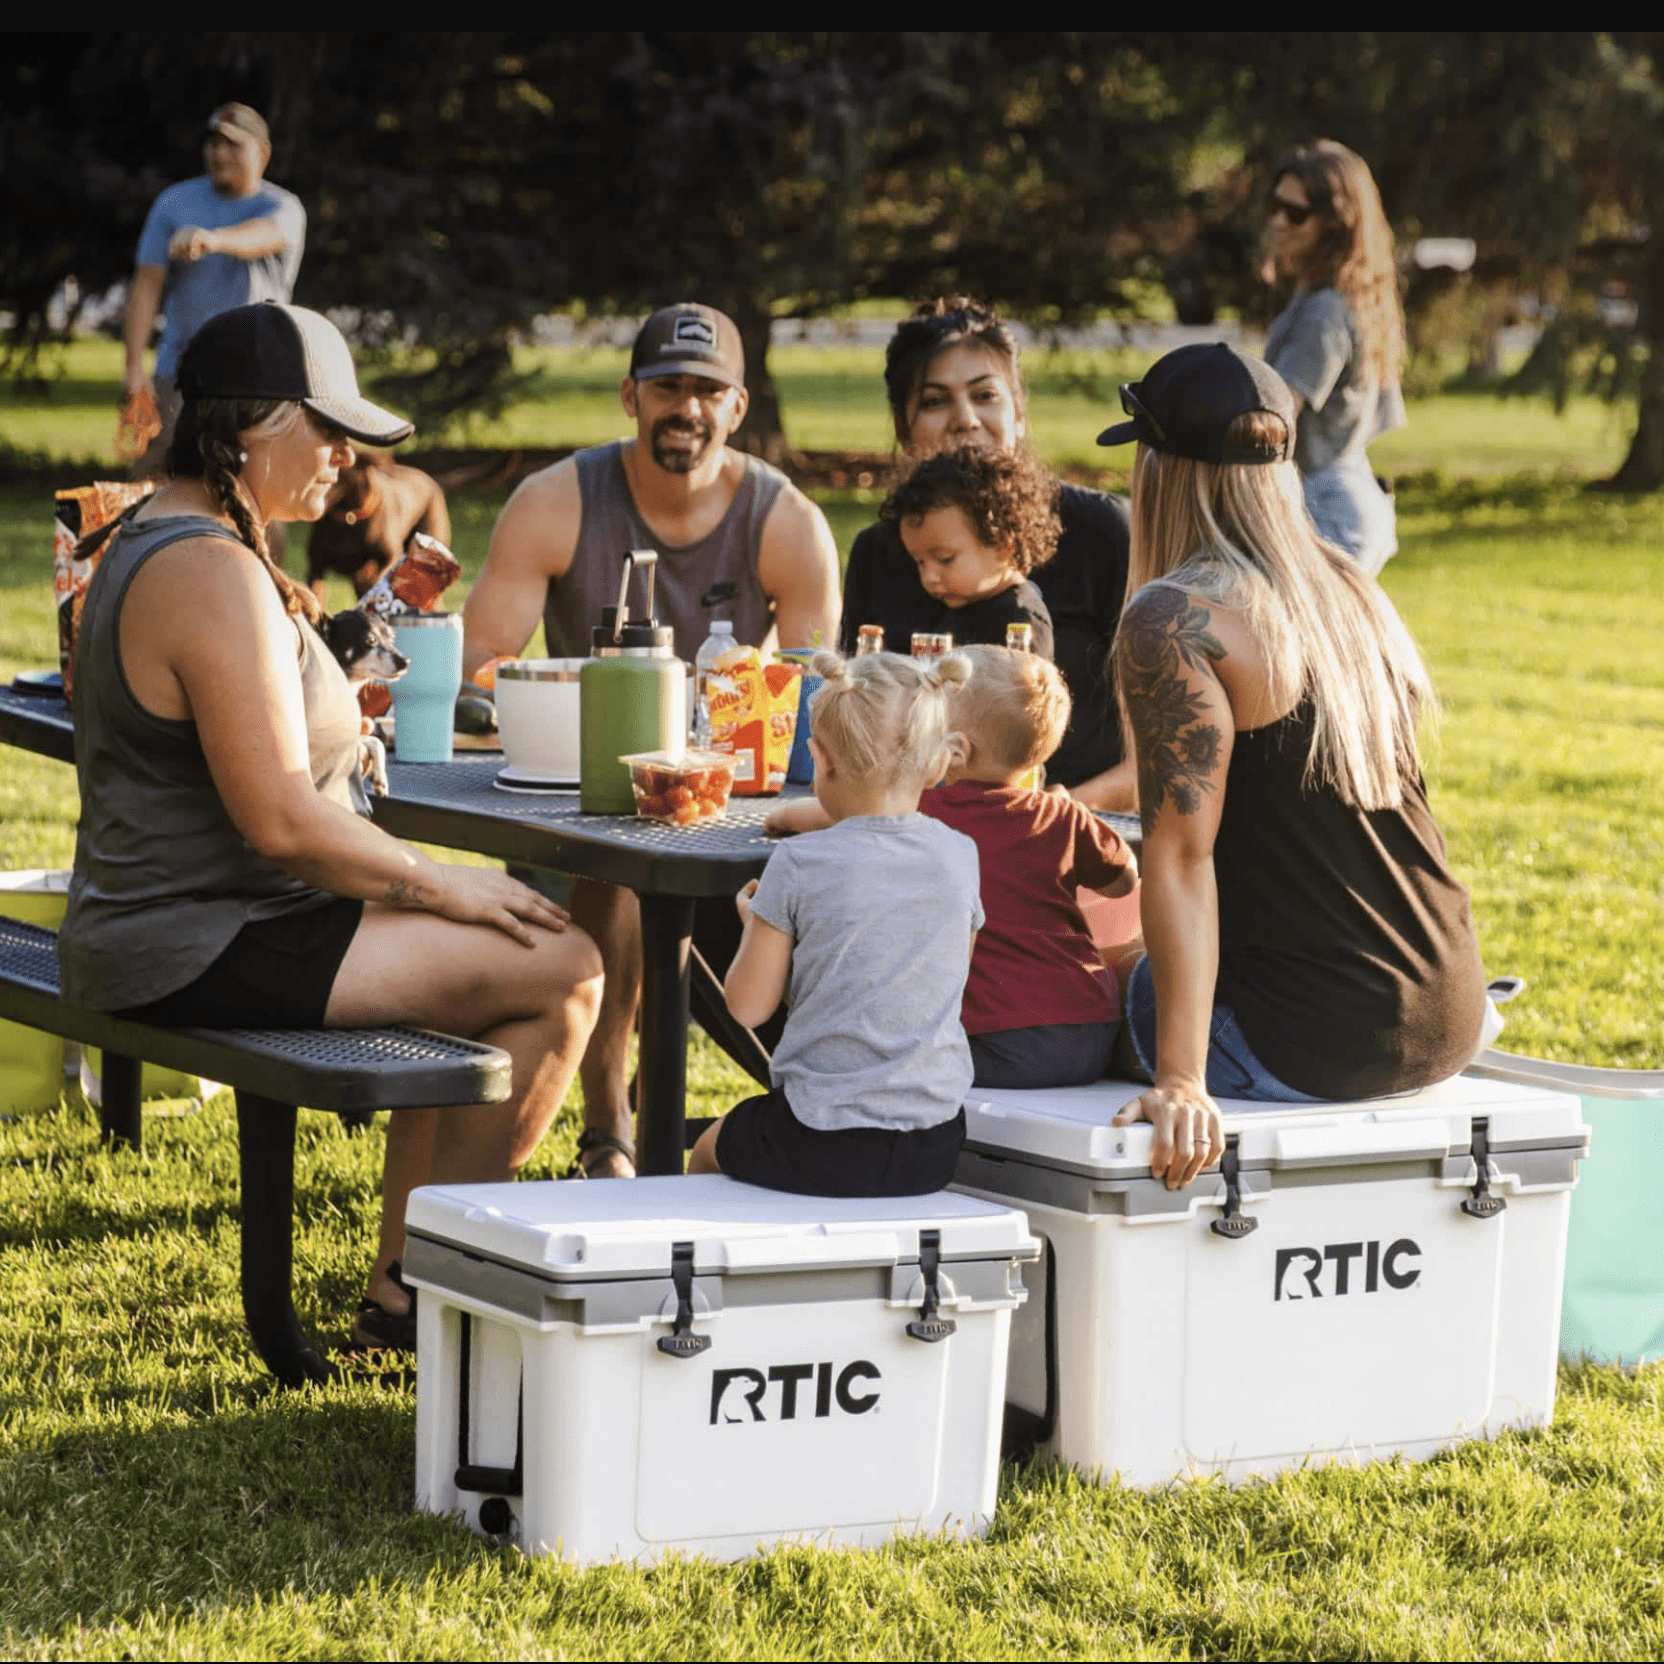 Rtic Cooler For Camping